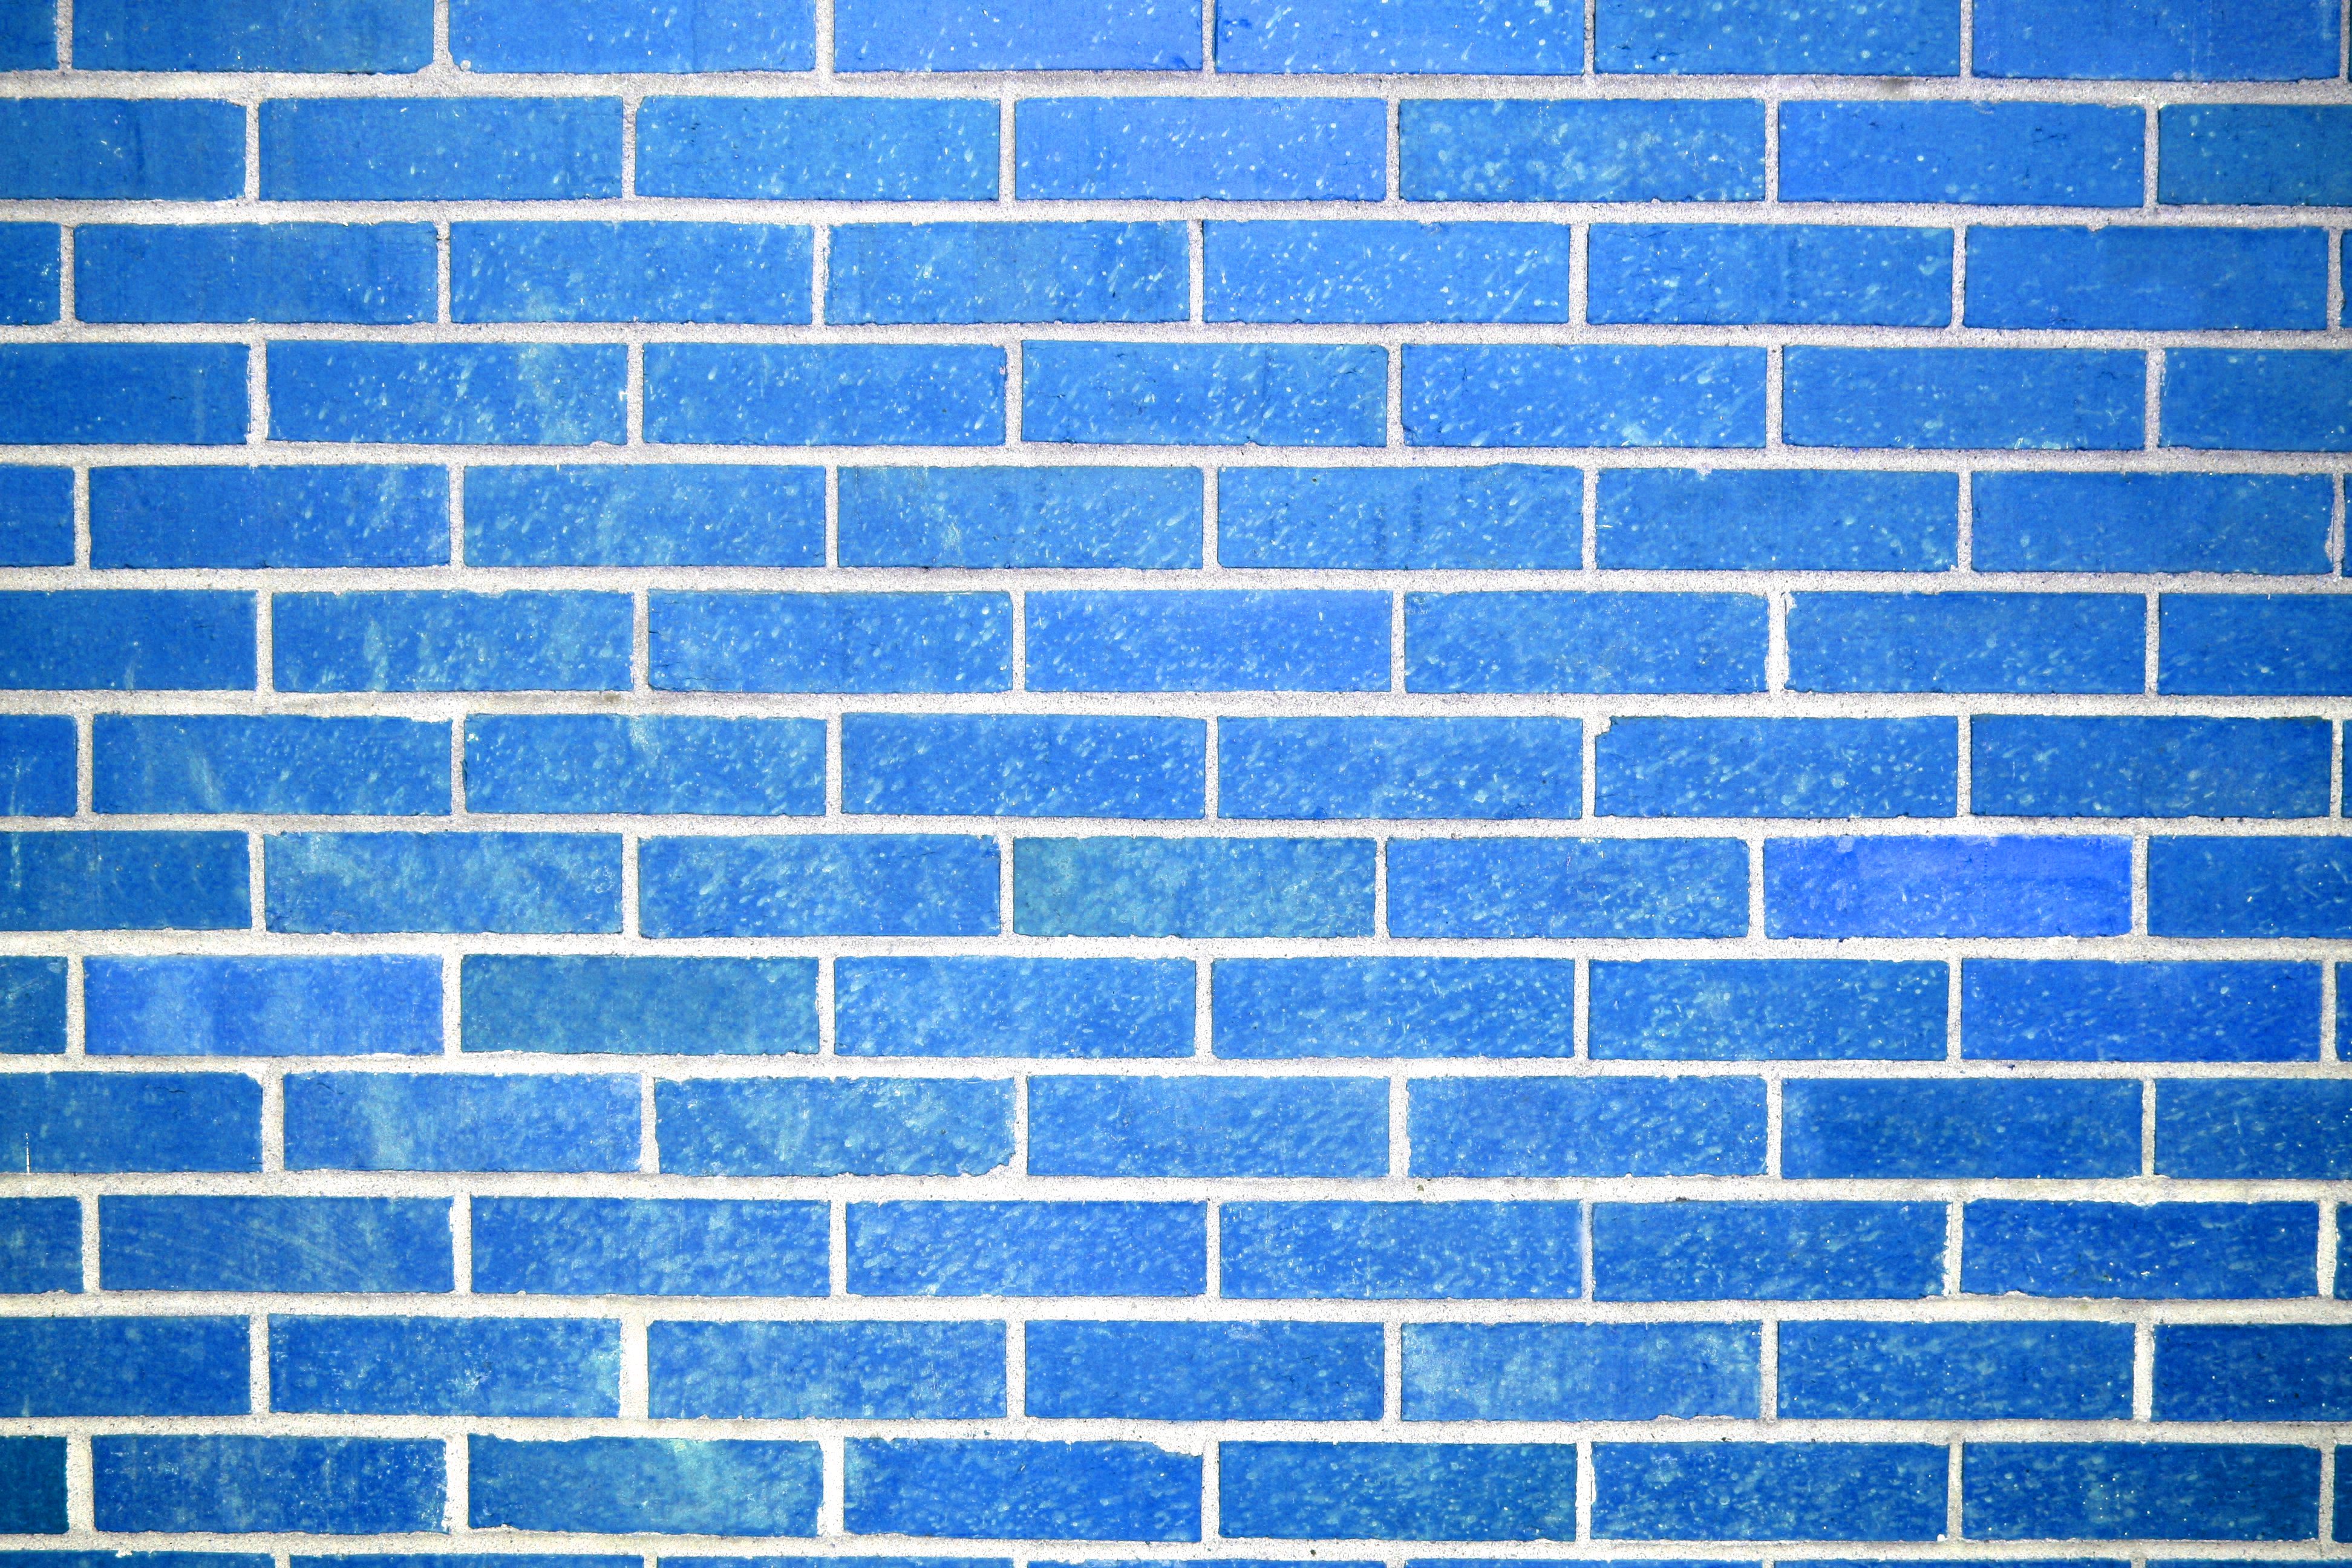 Sky Blue Brick Wall Texture Picture | Free Photograph | Photos ...